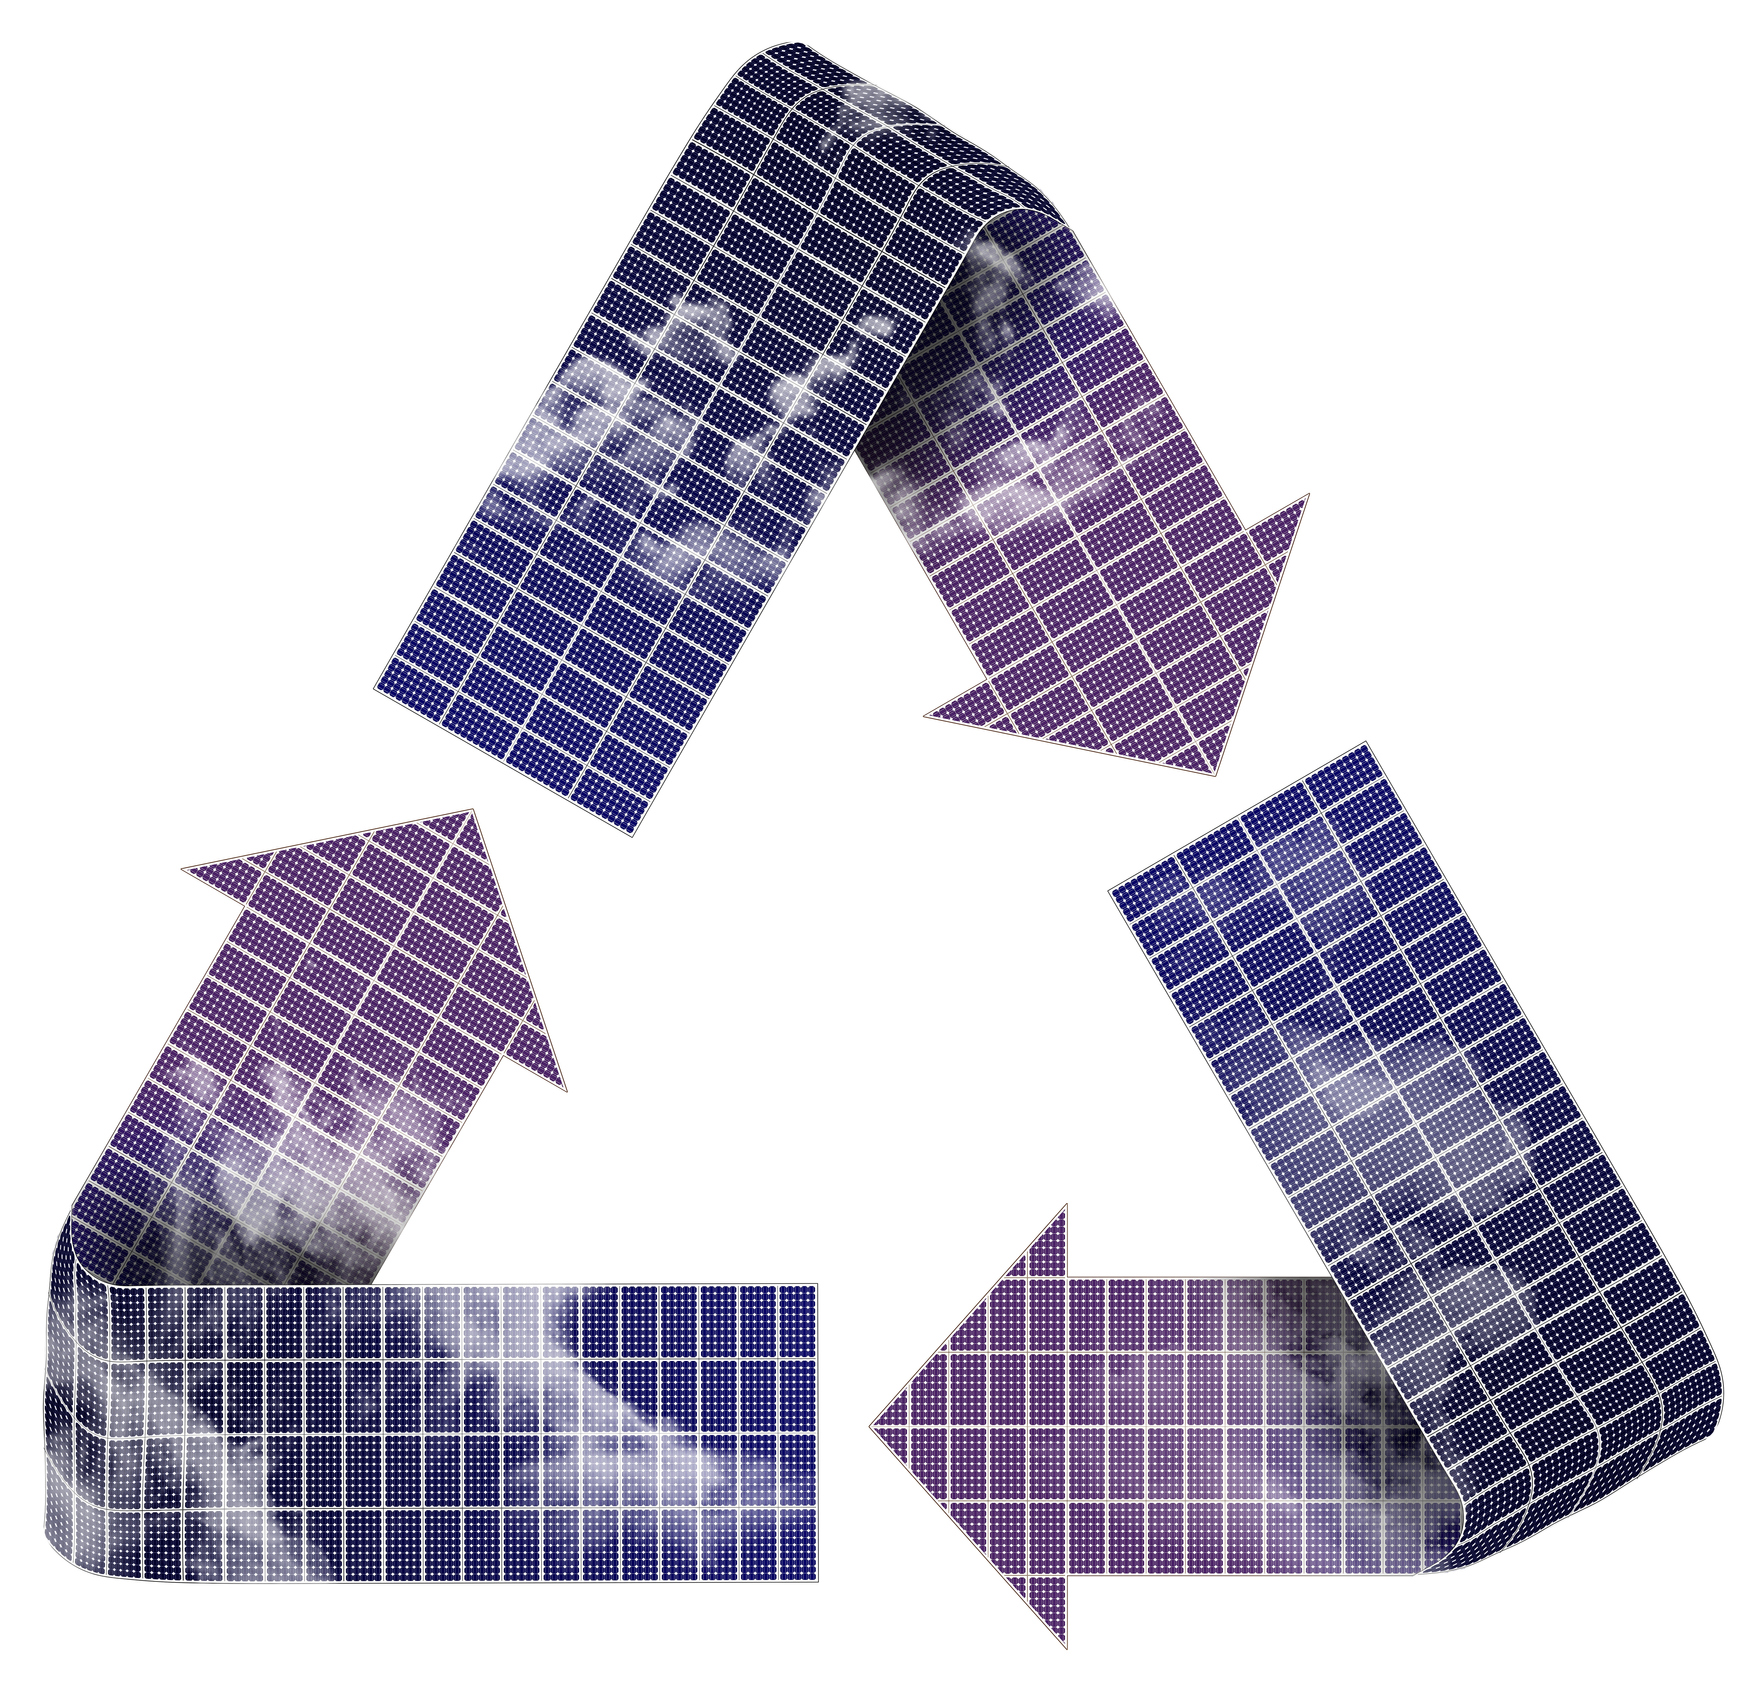 Illustration of the recycling symbol made out of solar panels.